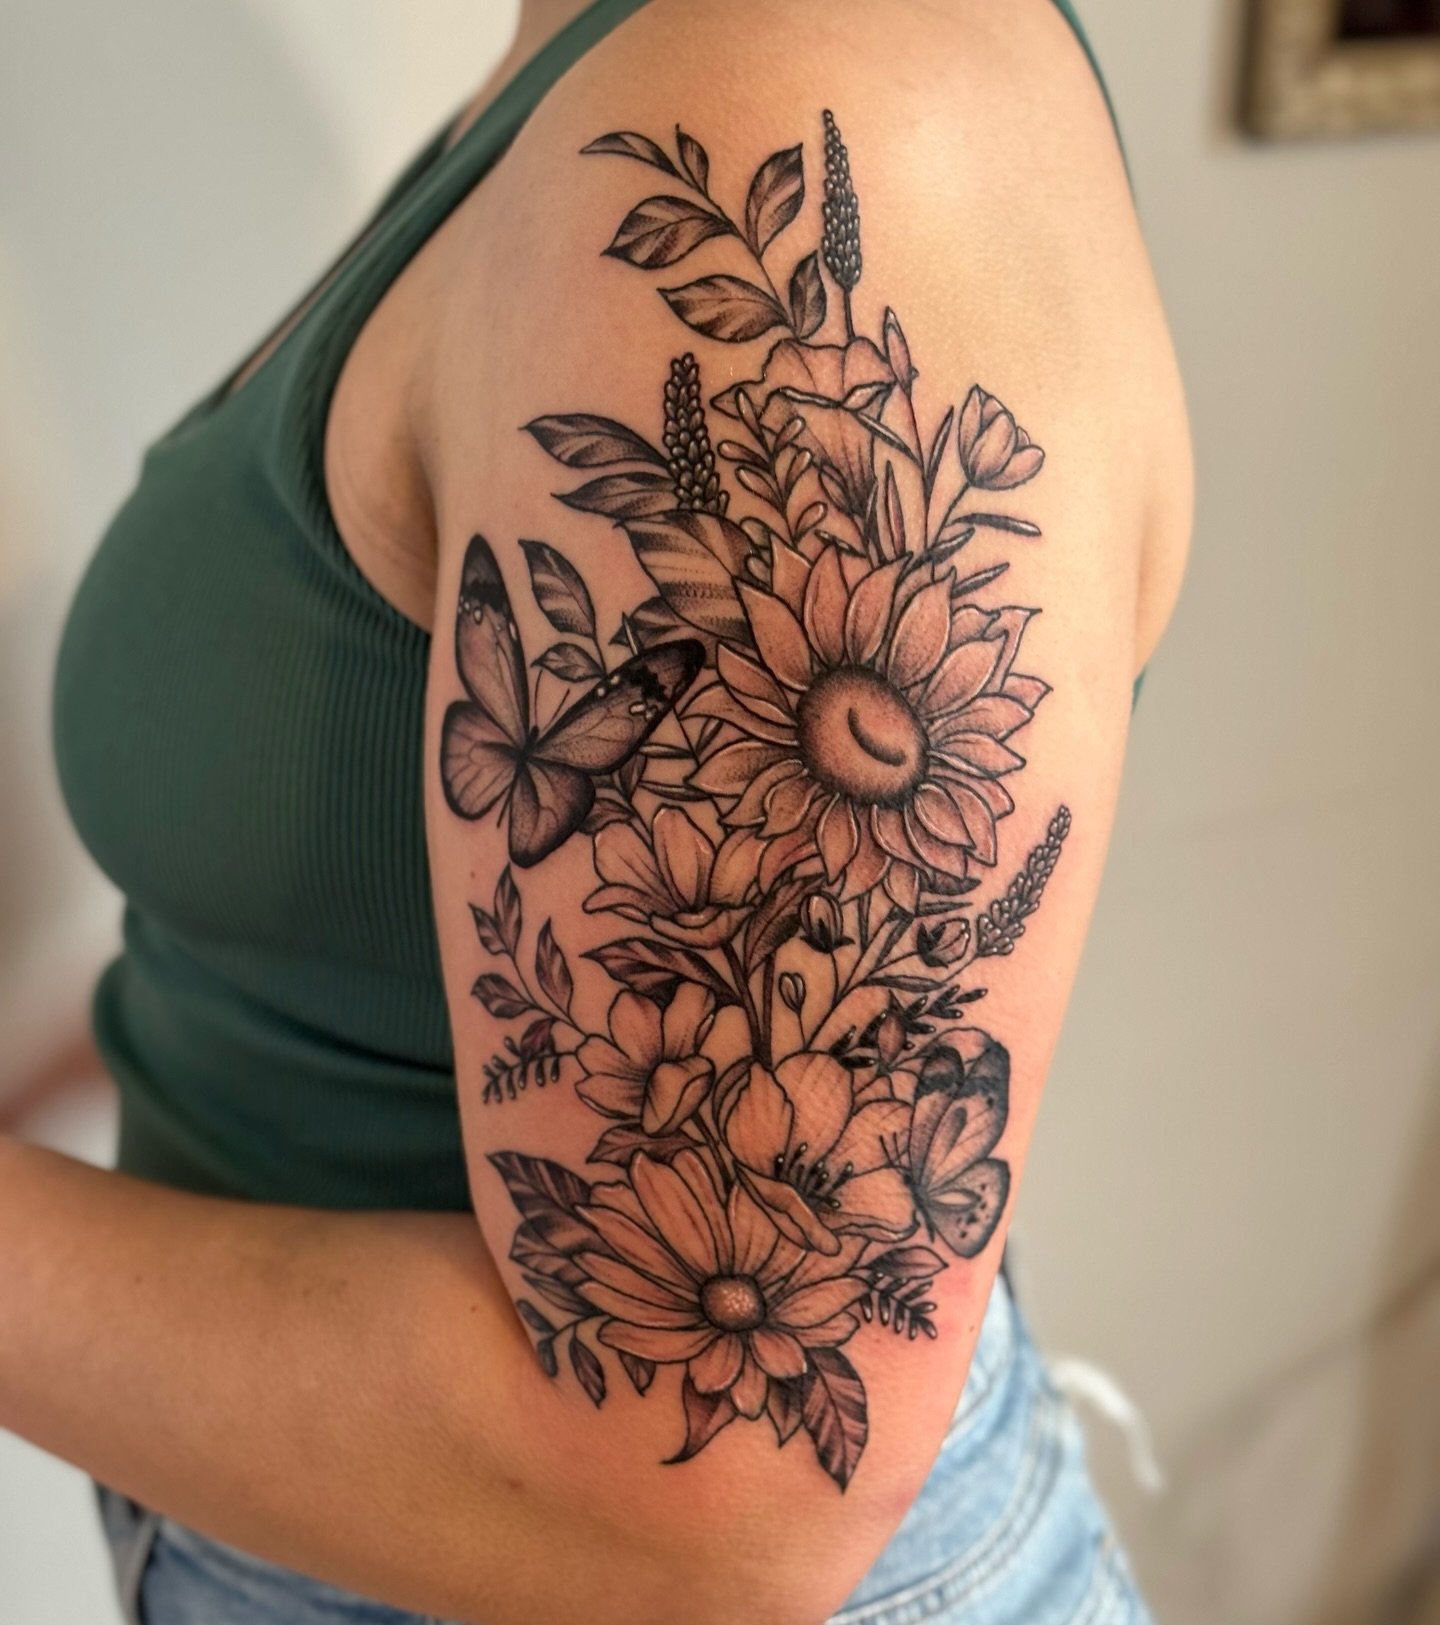 Embracing the beauty of the untamed wilderness with wildflowers. Now booking for July 🌿
&bull;
&bull;
&bull;
&bull;
&bull;
&bull;
&bull;
#femaletattooartist #stl #stlouis #wildflowers #flowertattoo